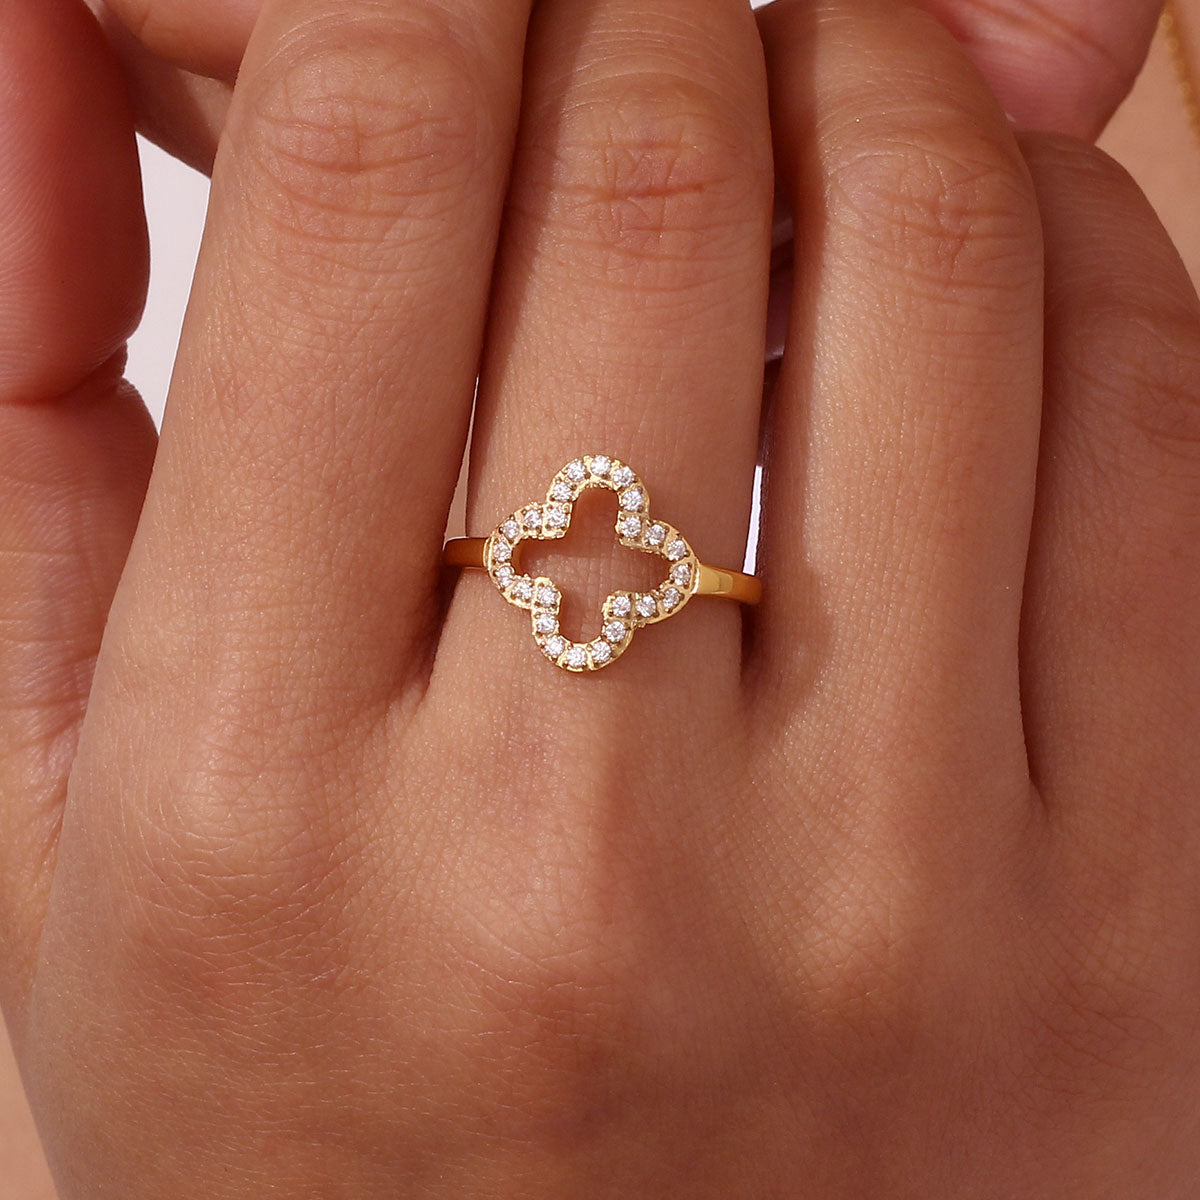 Hollow Clover Ring